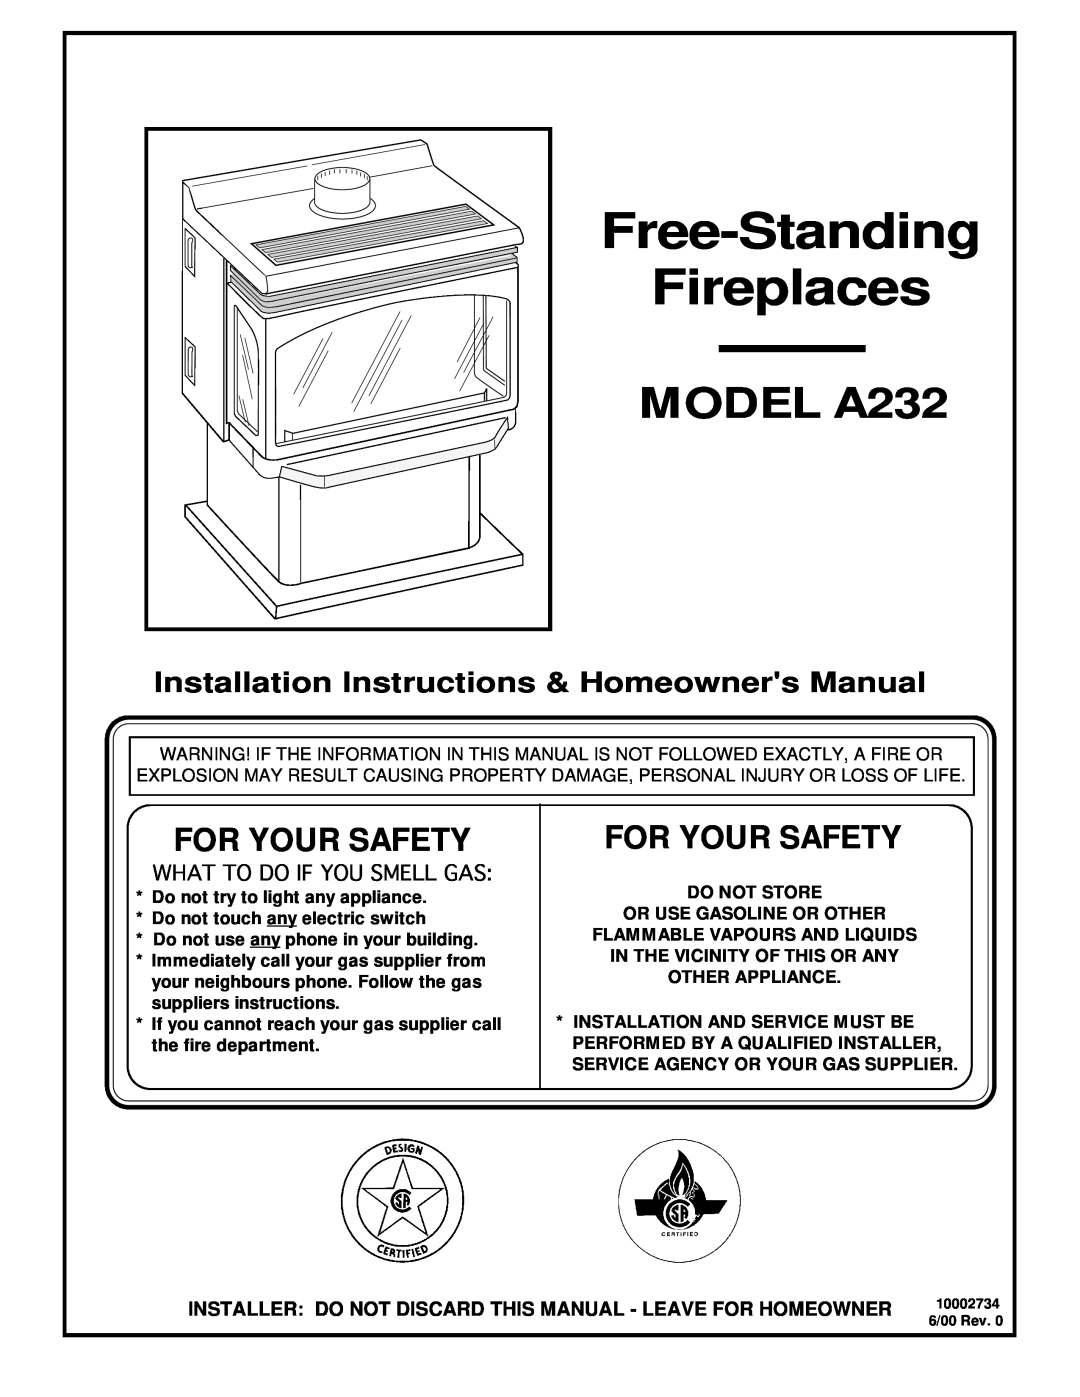 Vermont Casting installation instructions For Your Safety, Free-Standing Fireplaces, MODEL A232 